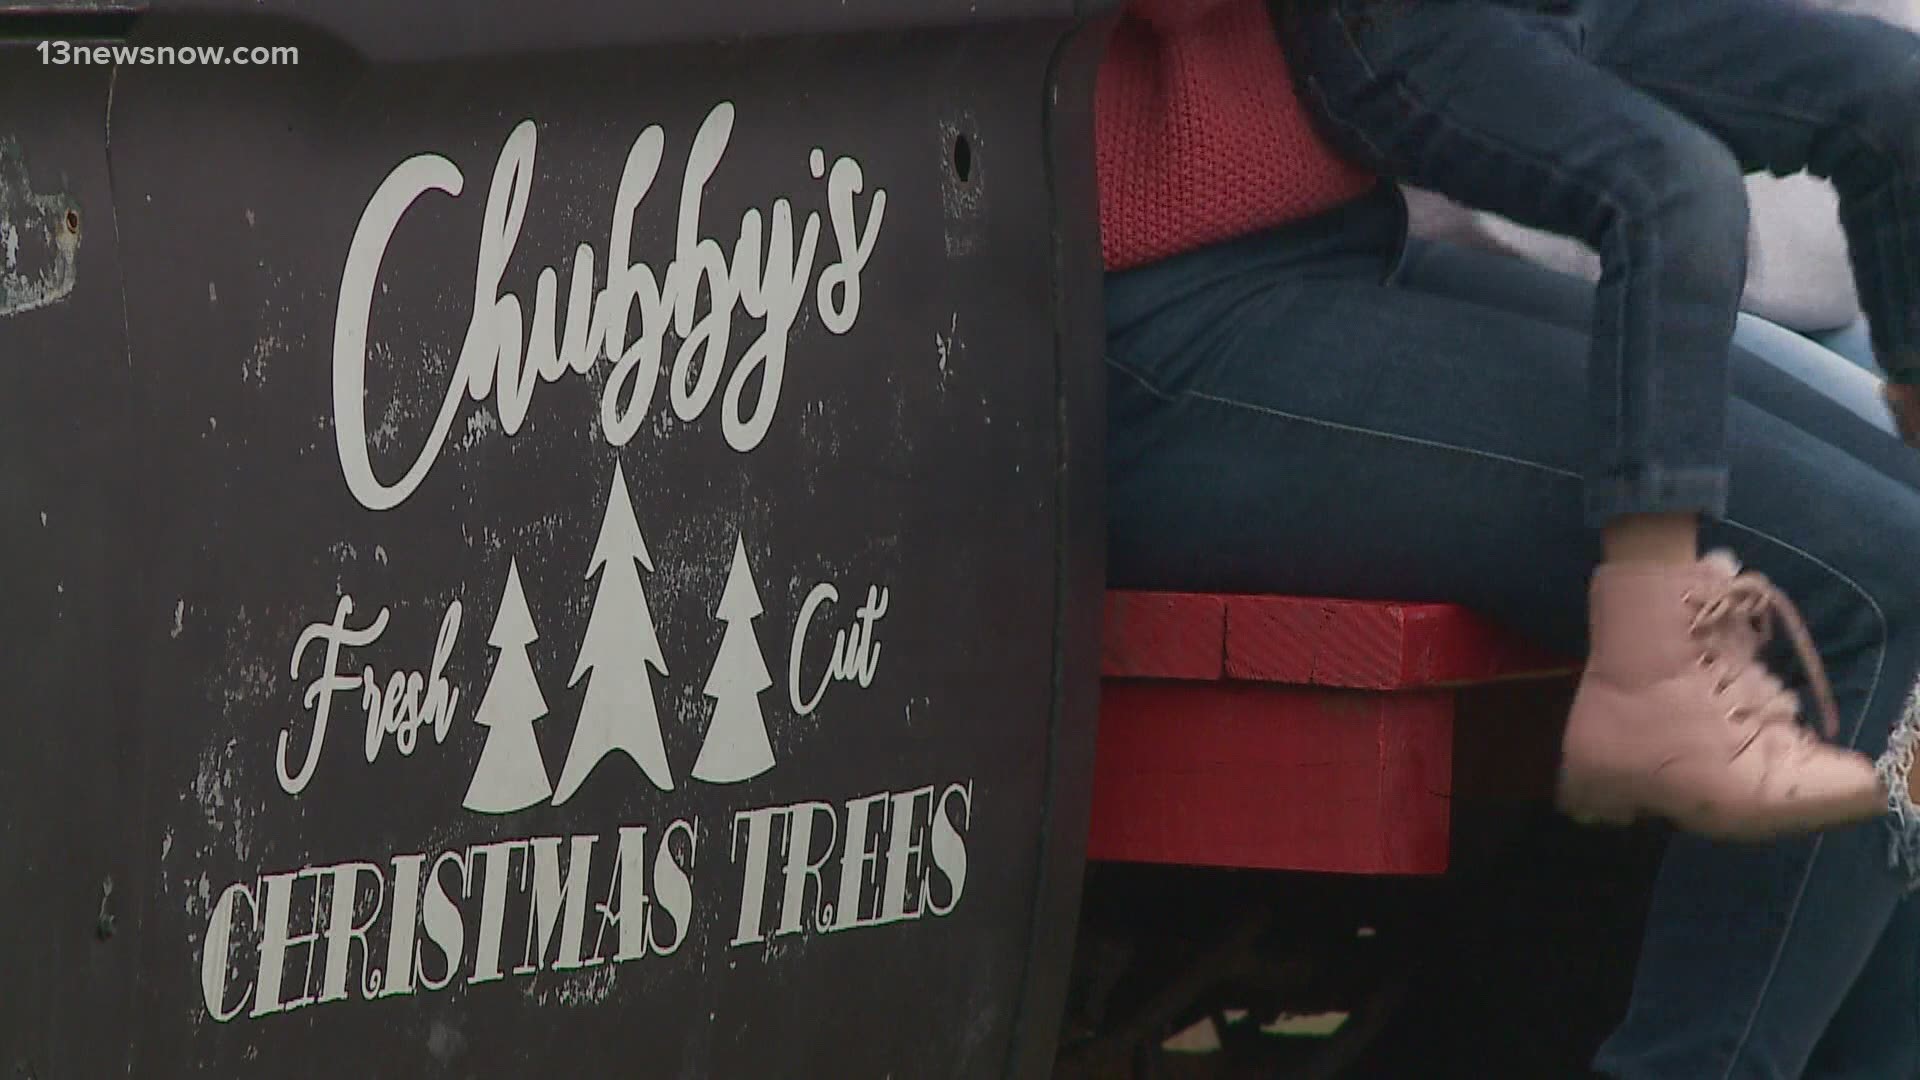 Chubby's Christmas Tree Farm in Chesapeake saw an increase in sales on Black Friday, they decided to start selling earlier than they normally would.